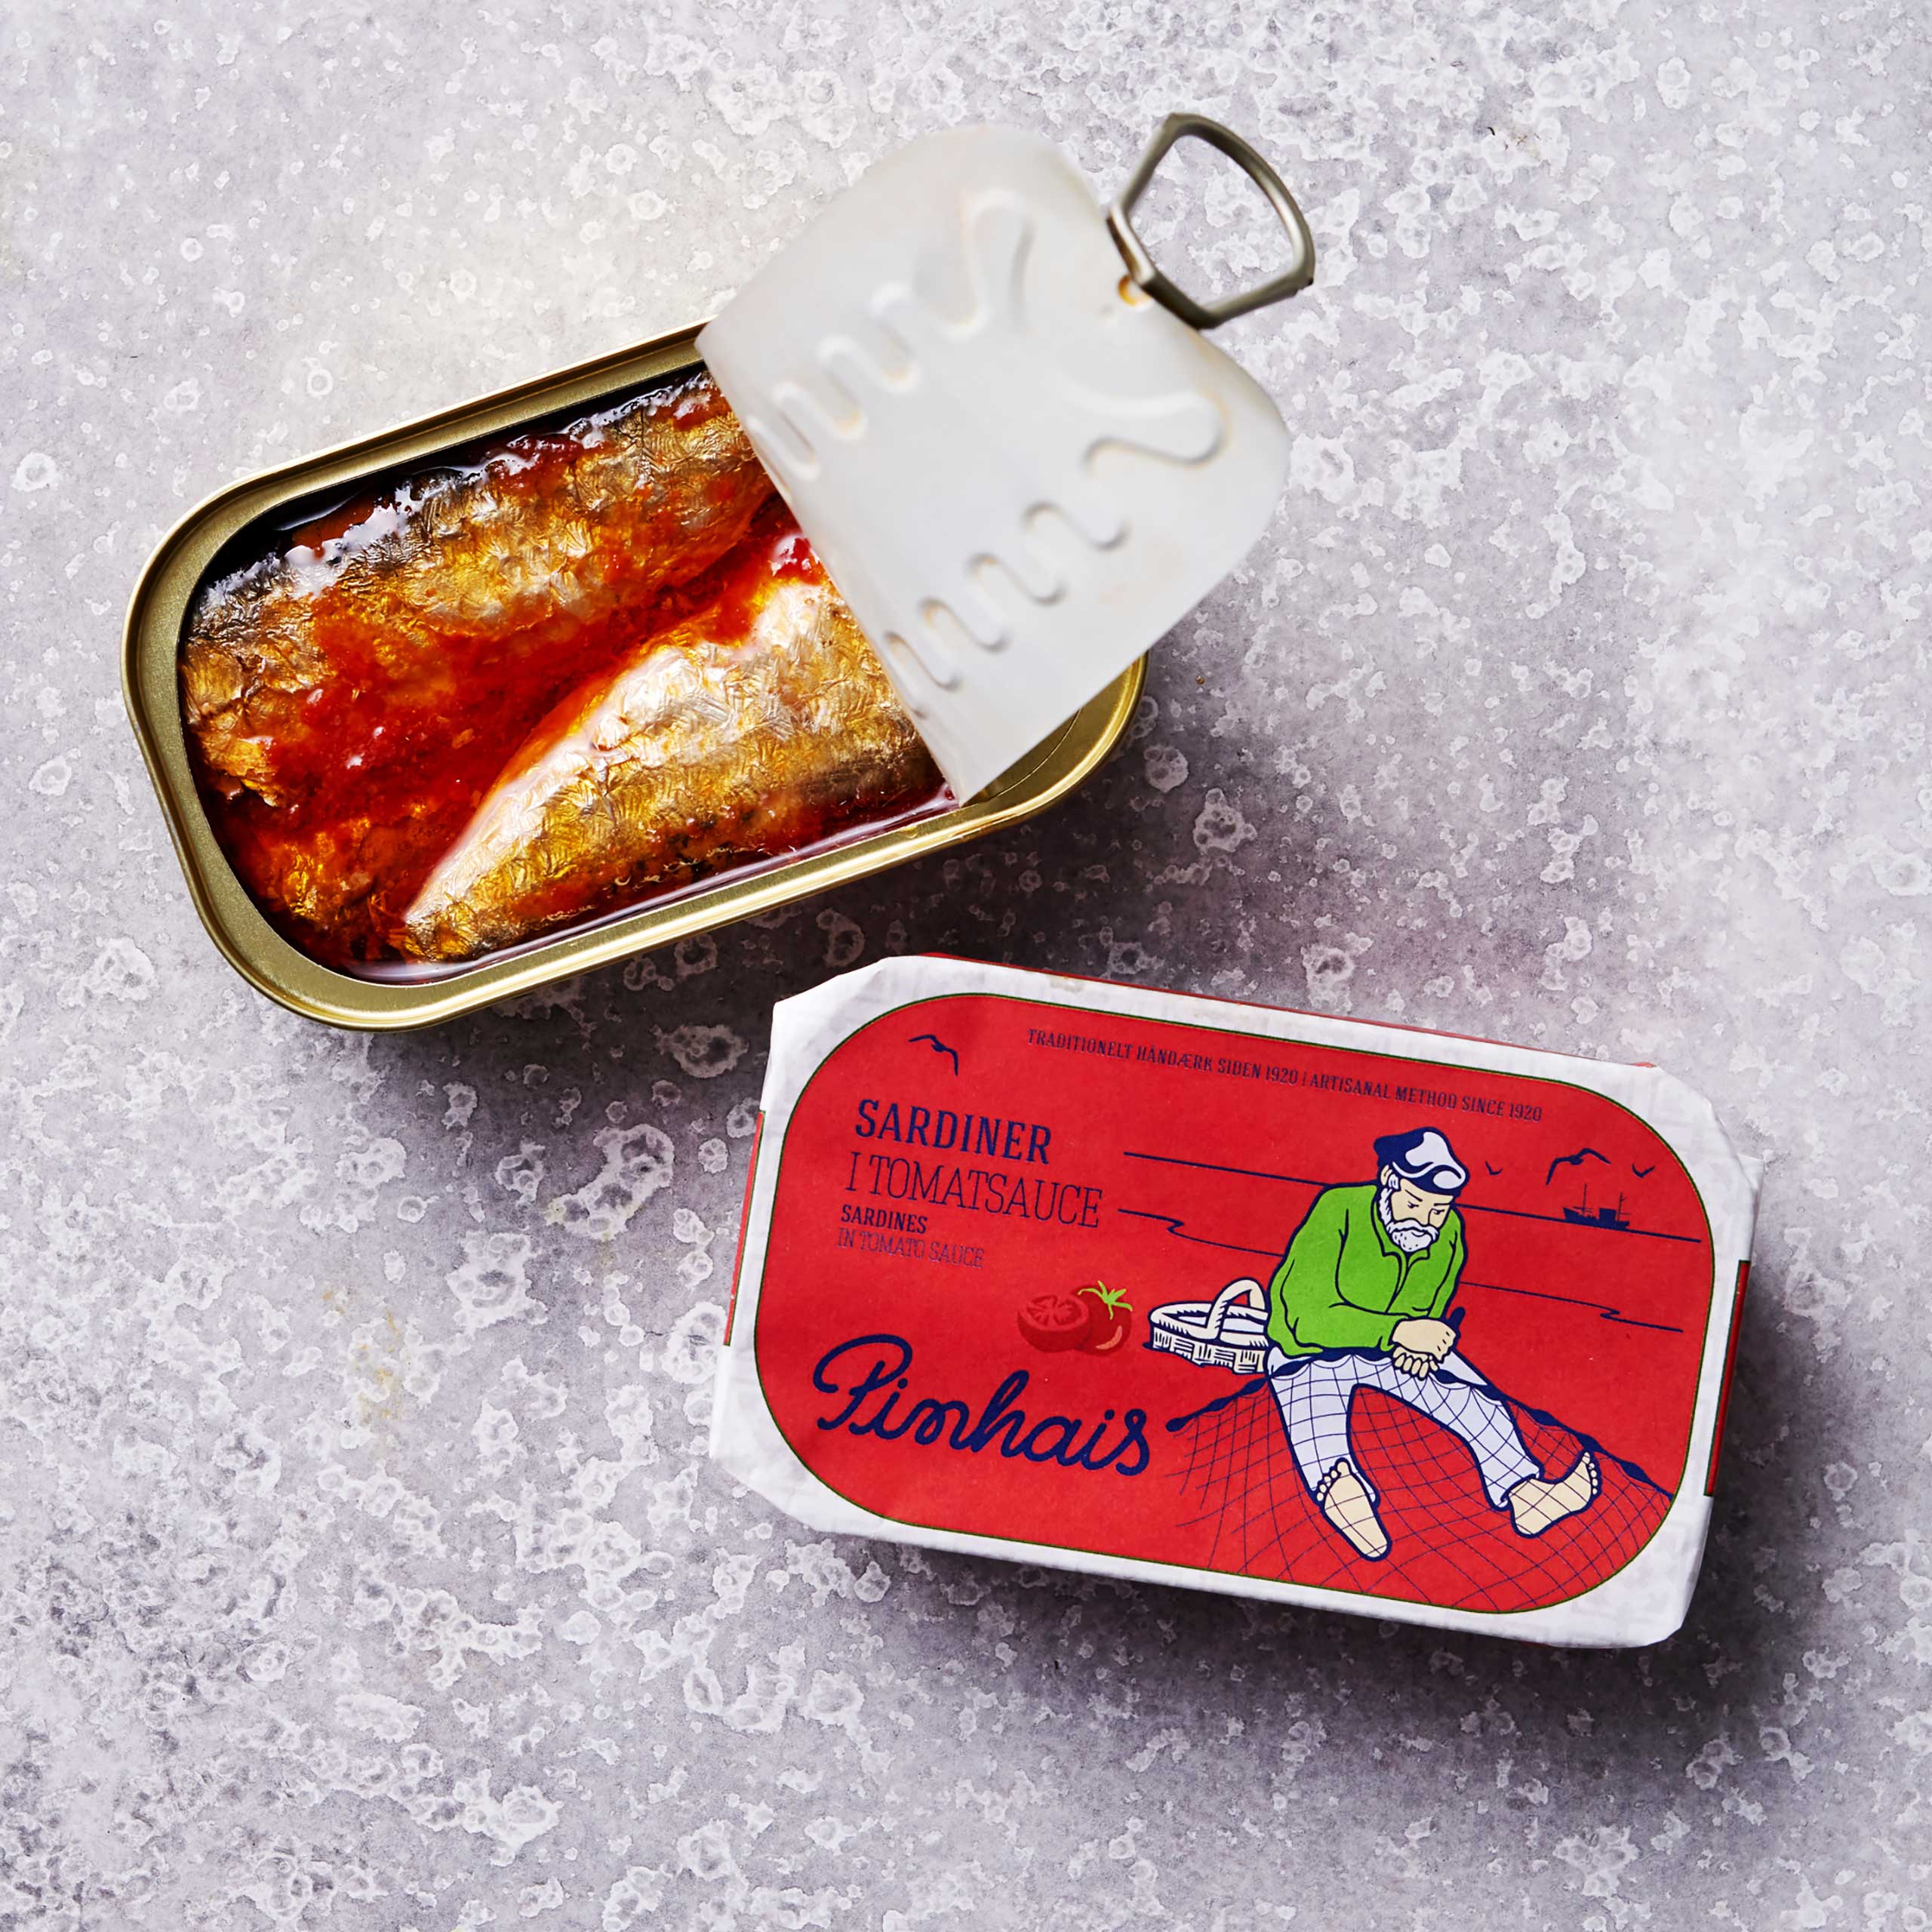 Sardines in tomato and olive oil